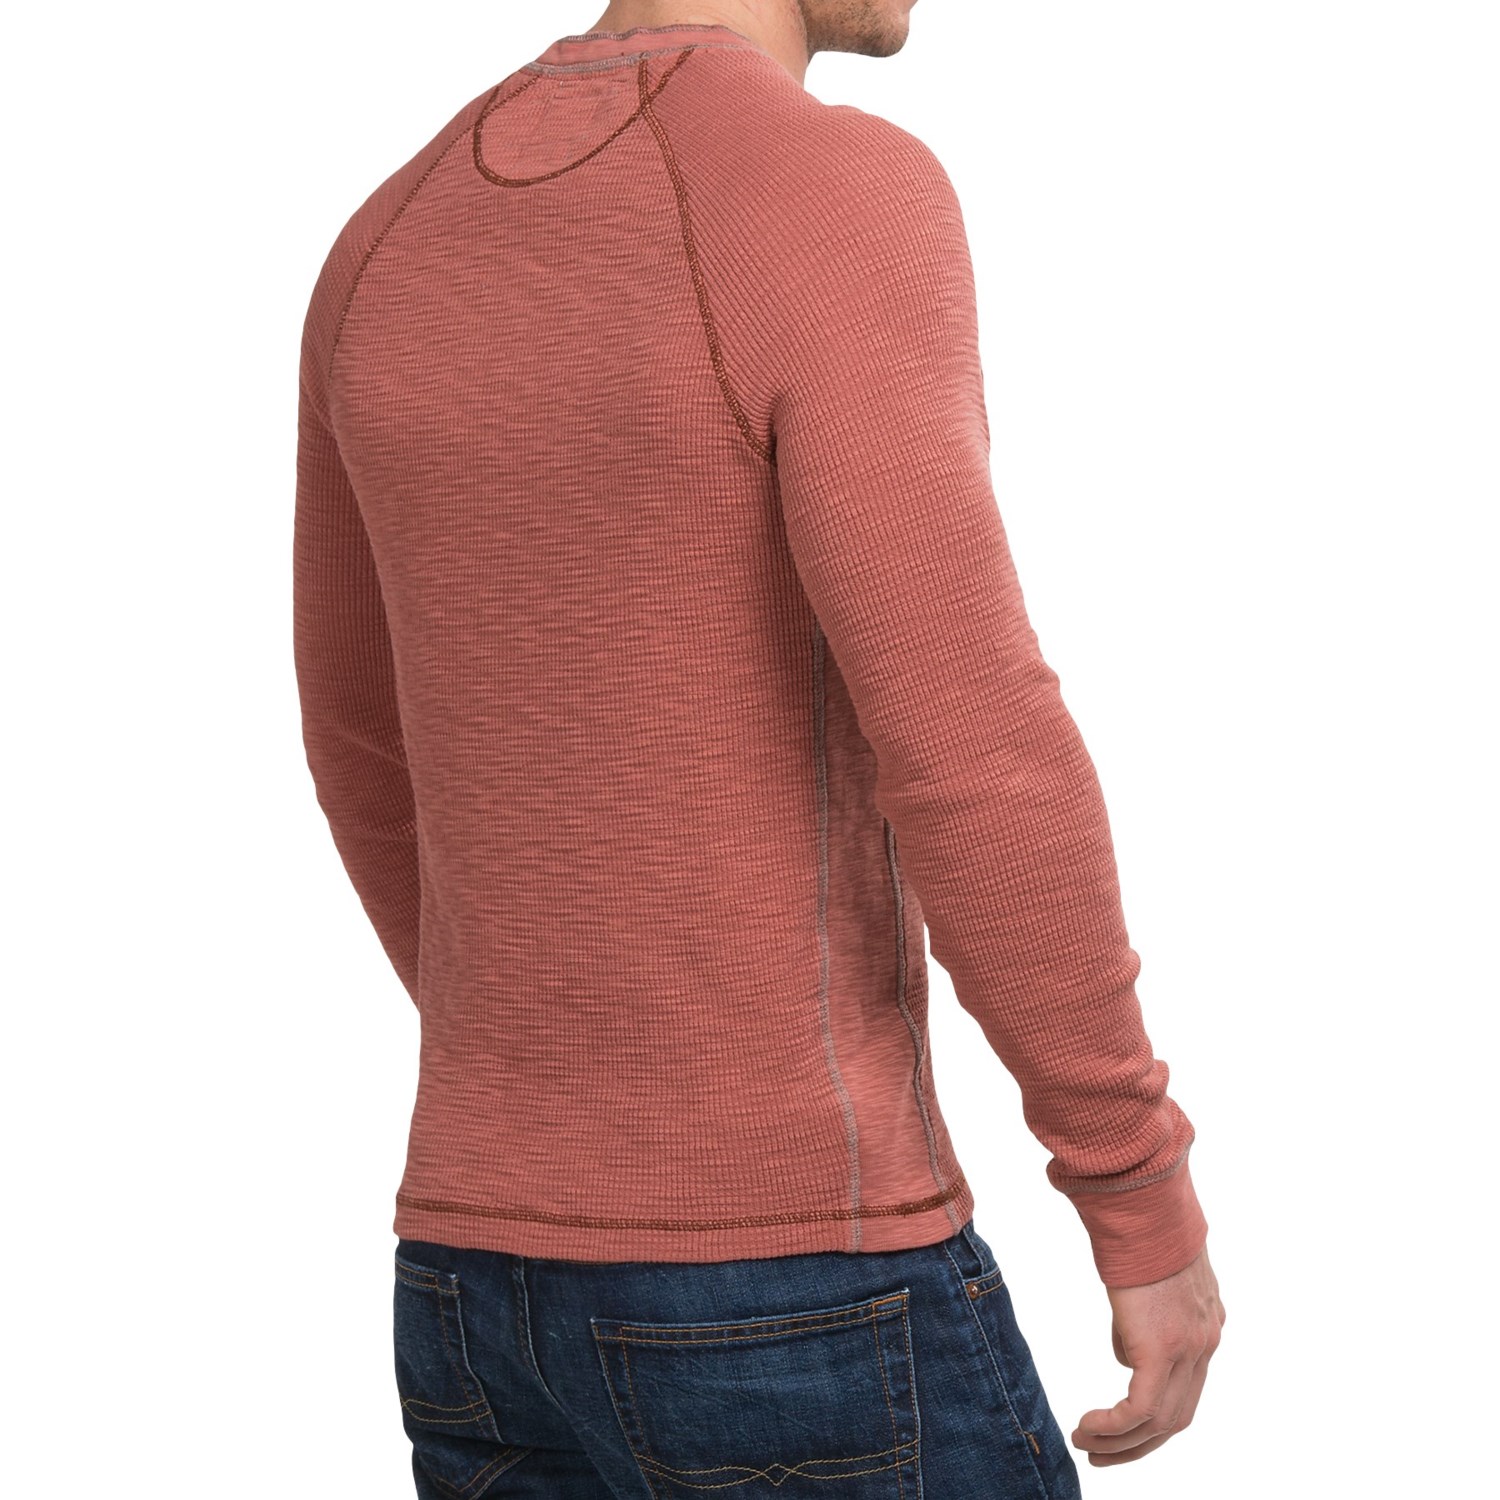 True Grit Waffle Thermal Henley Shirt (For Men) - Save 69%